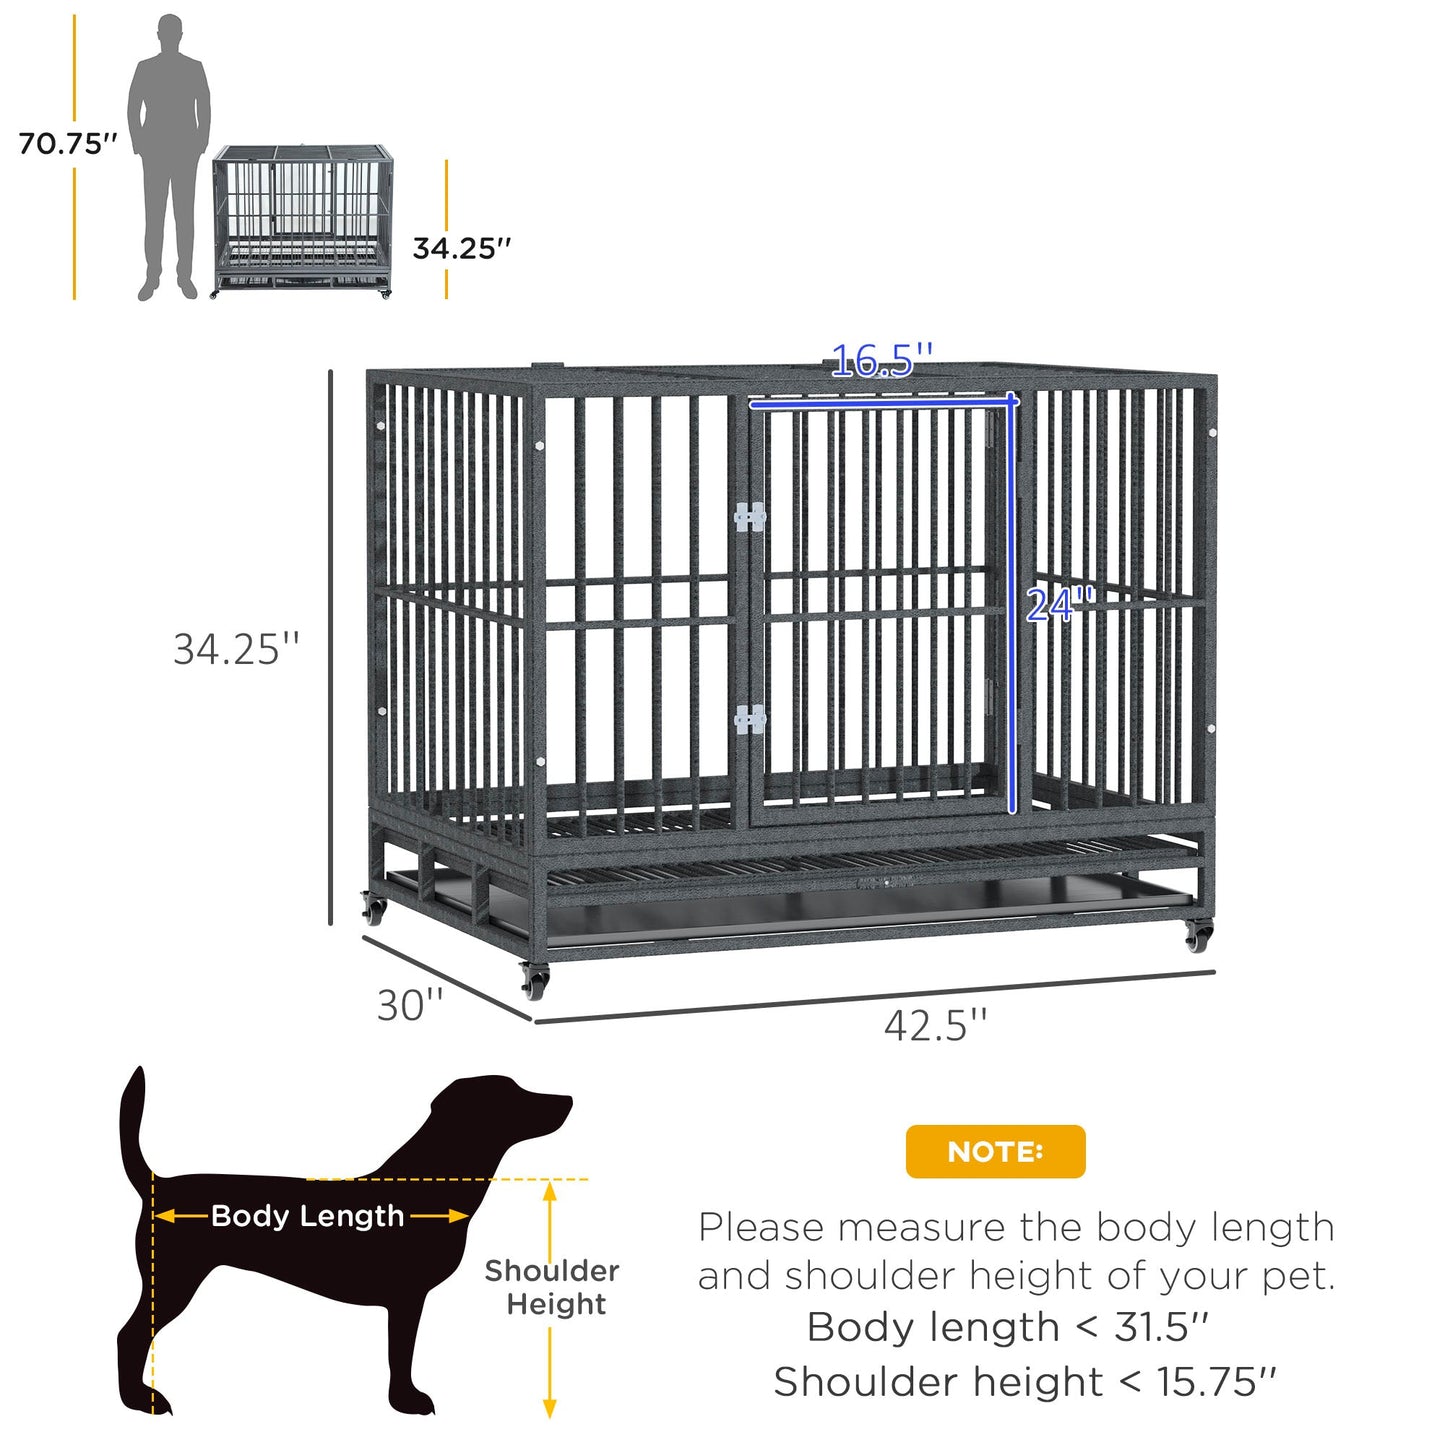 Pet Supplies-42" Heavy Duty Dog Cage Dog Crate, Metal Dog Crater Kennel with Wheels, Double Door and Removable Tray, Gray - Outdoor Style Company